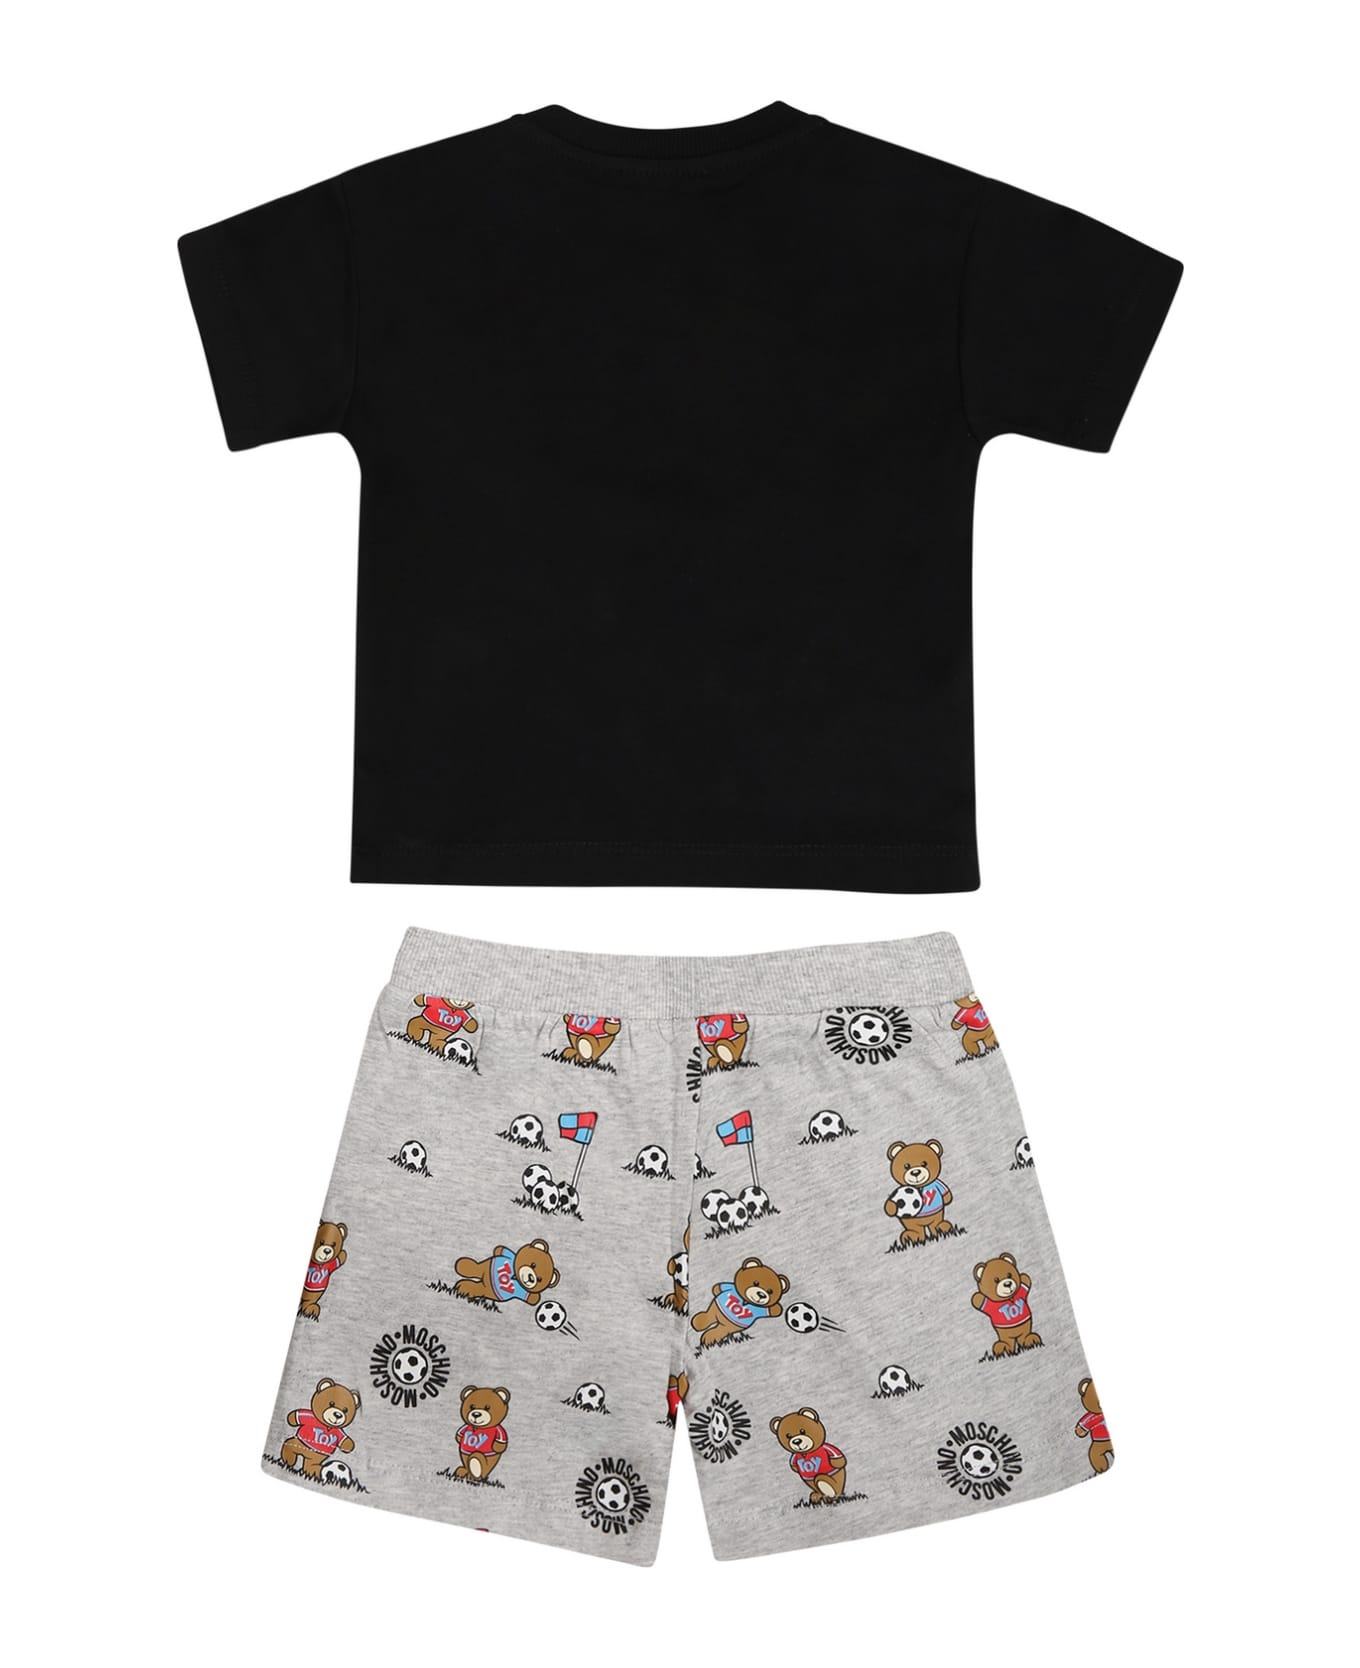 Moschino Black Suit For Baby Boy With Teddy Bear And Logo - Black ボトムス